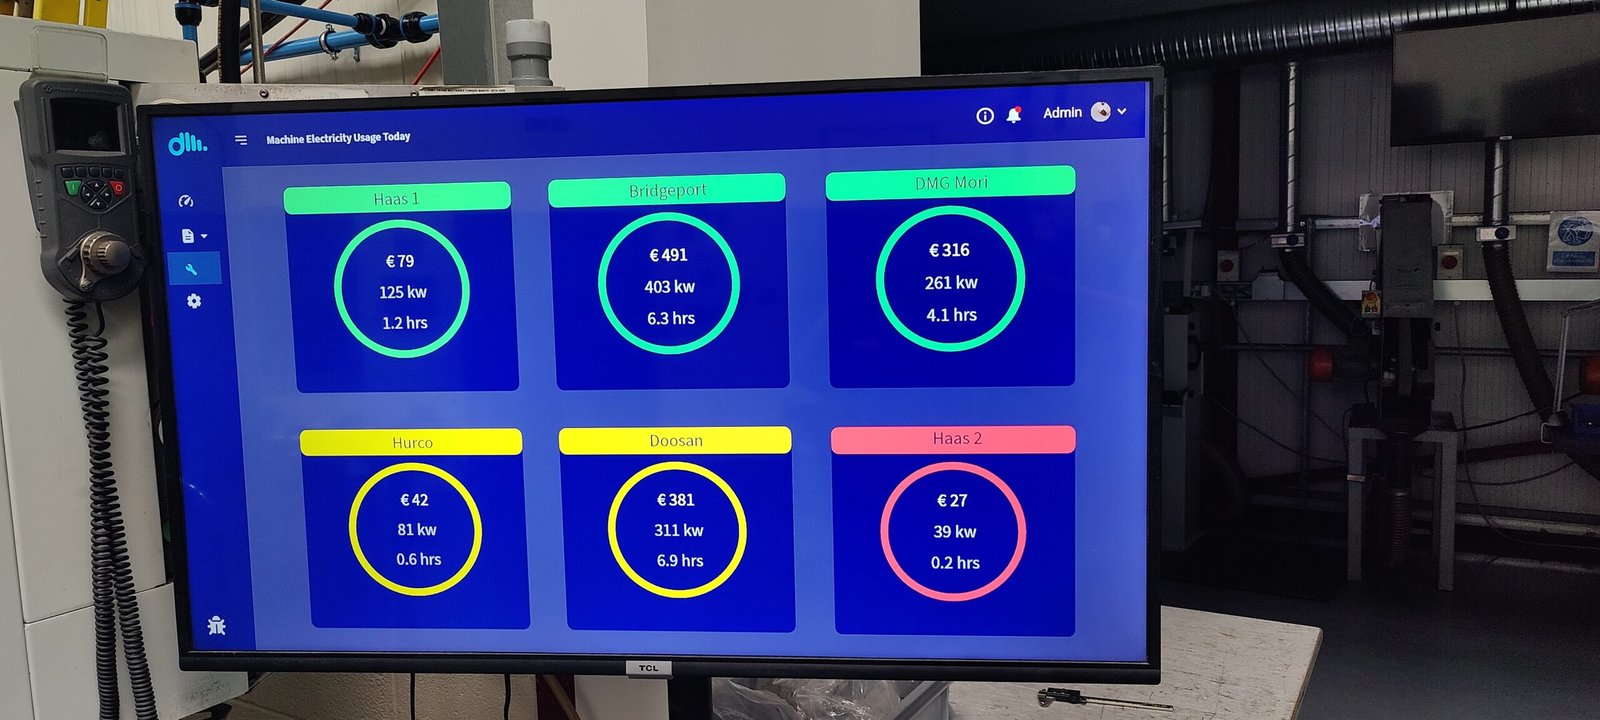 An image of an energy management dashboard on a factory floor, showing machine electric power usage